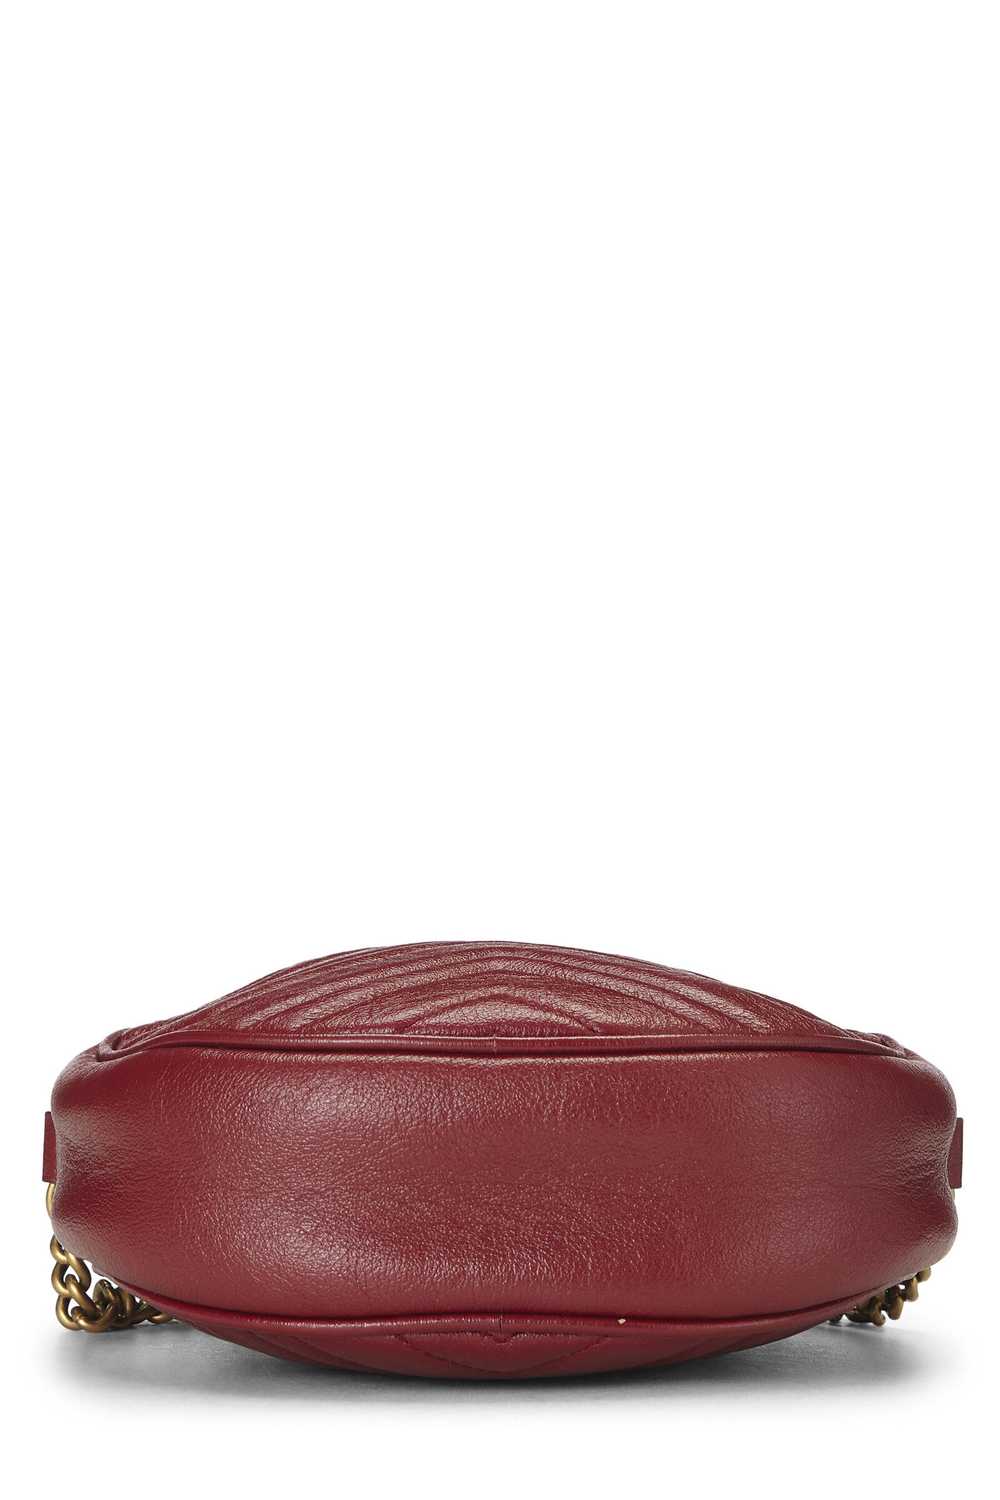 Red Leather GG Marmont Round Shoulder Bag Mini - image 5